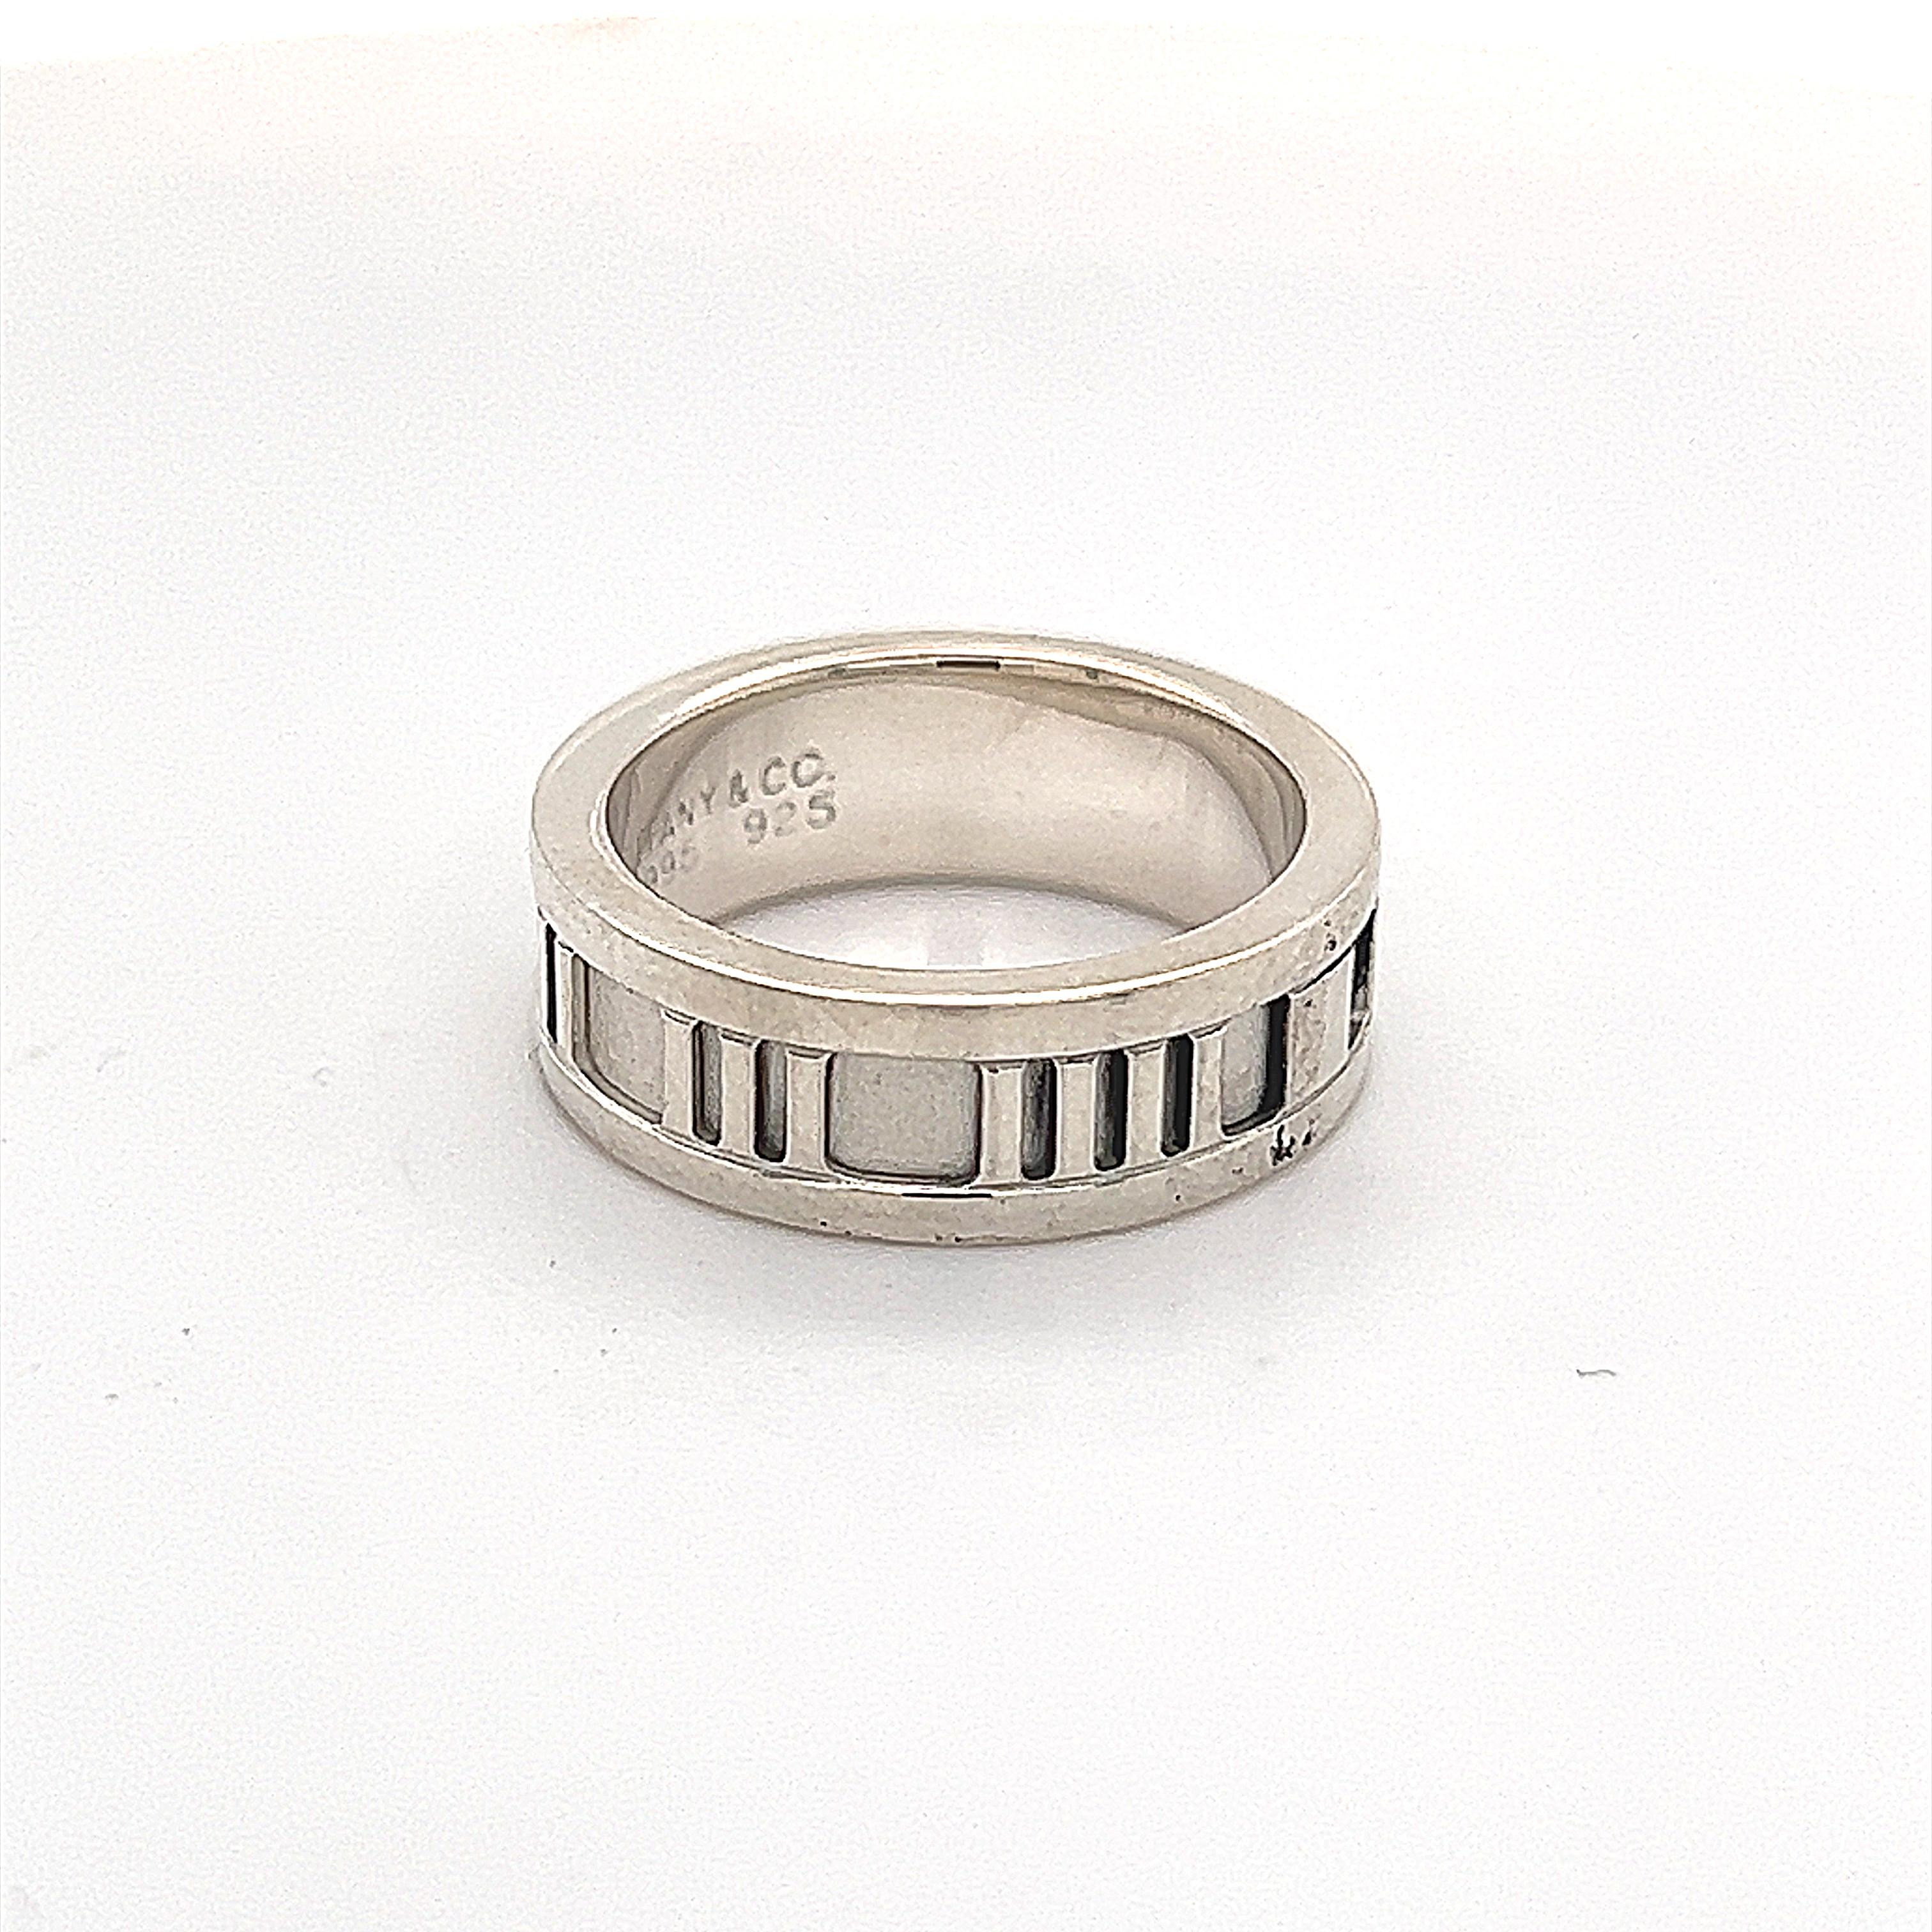 Tiffany & Co. Estate Atlas Ring 4 Silver 6 mm Height 2